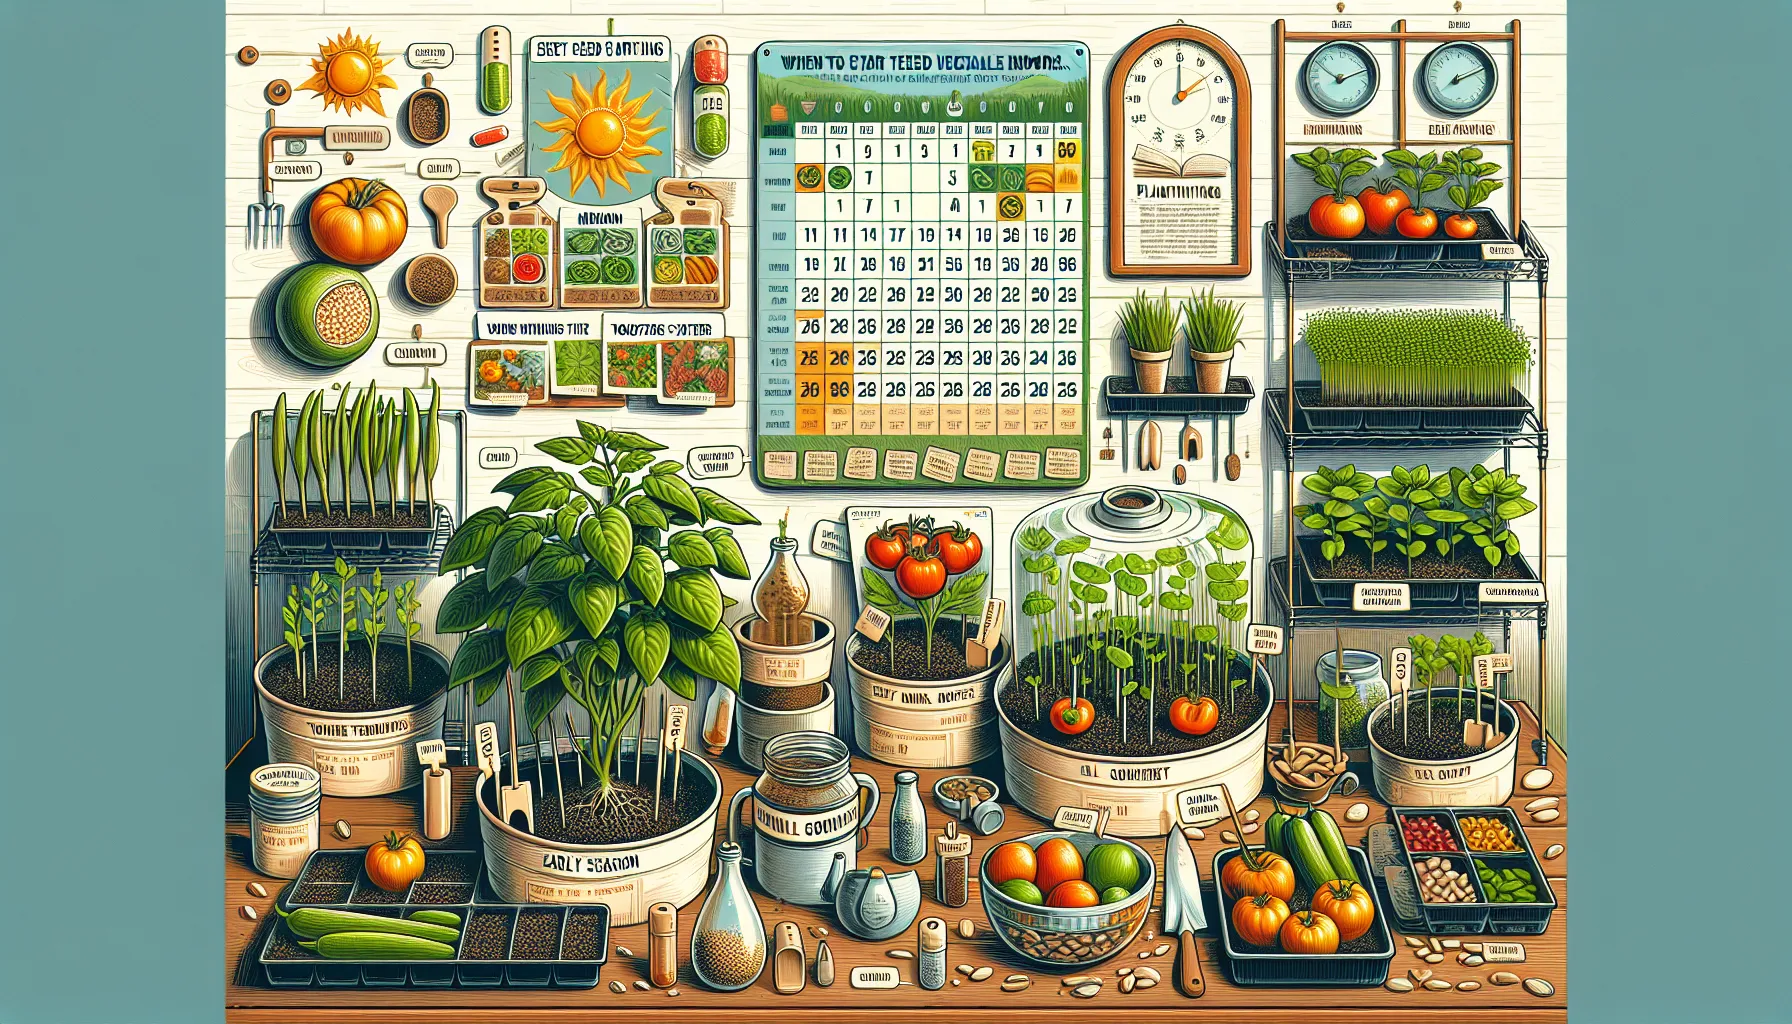 An illustrated guide showing when to start vegetable seeds indoors, with various plants and tools arranged on shelves and a table.